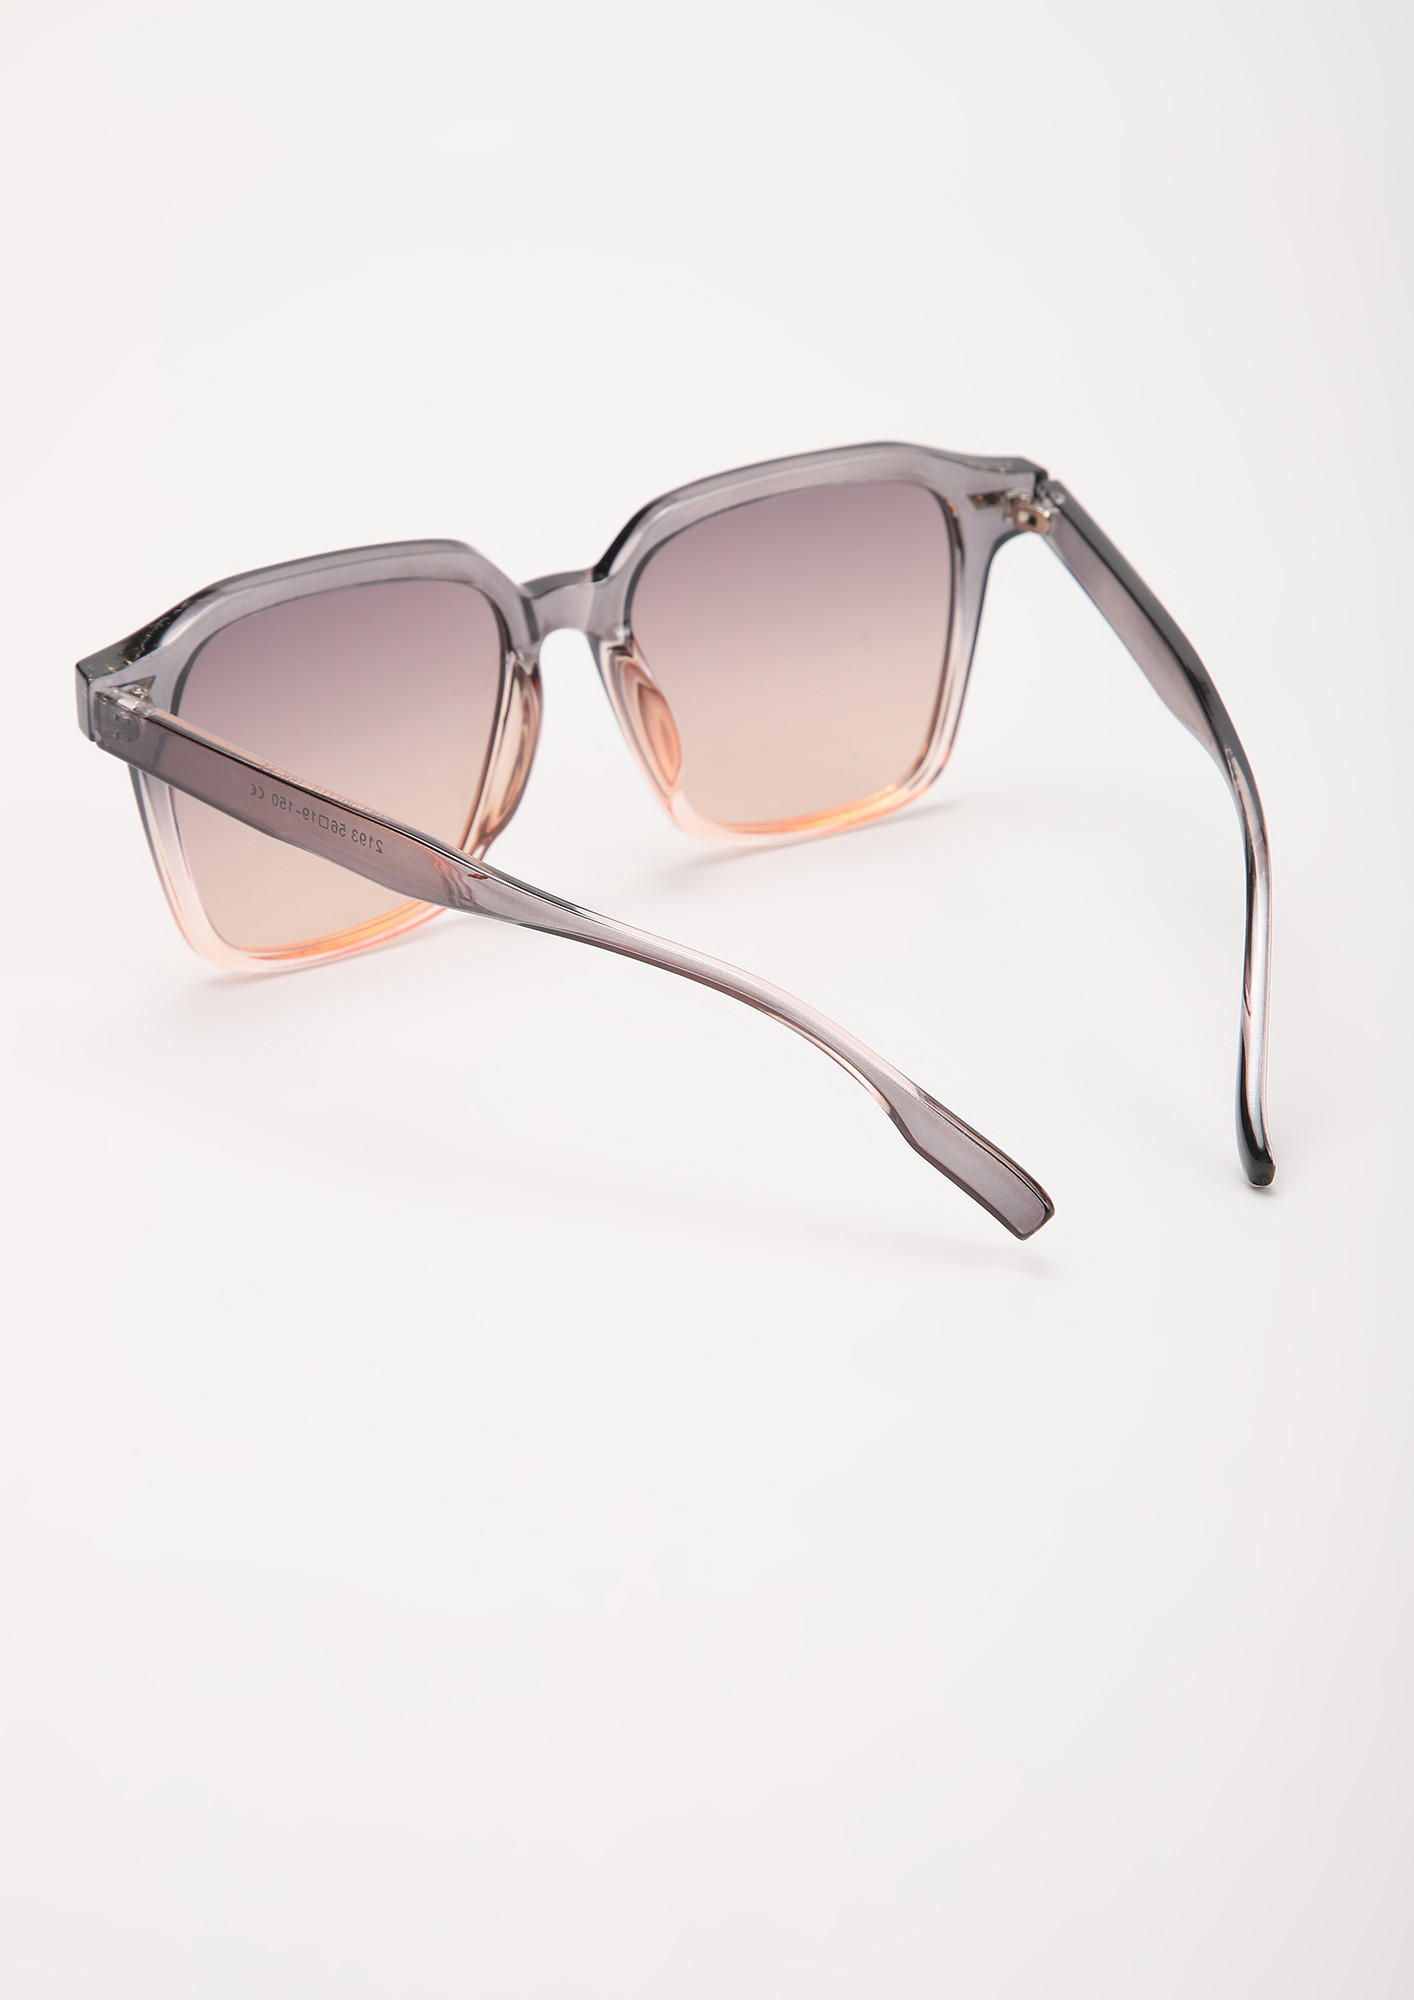 S-PRINTING ALL OVER GREY SQUARE FRAME SUNGLASSES